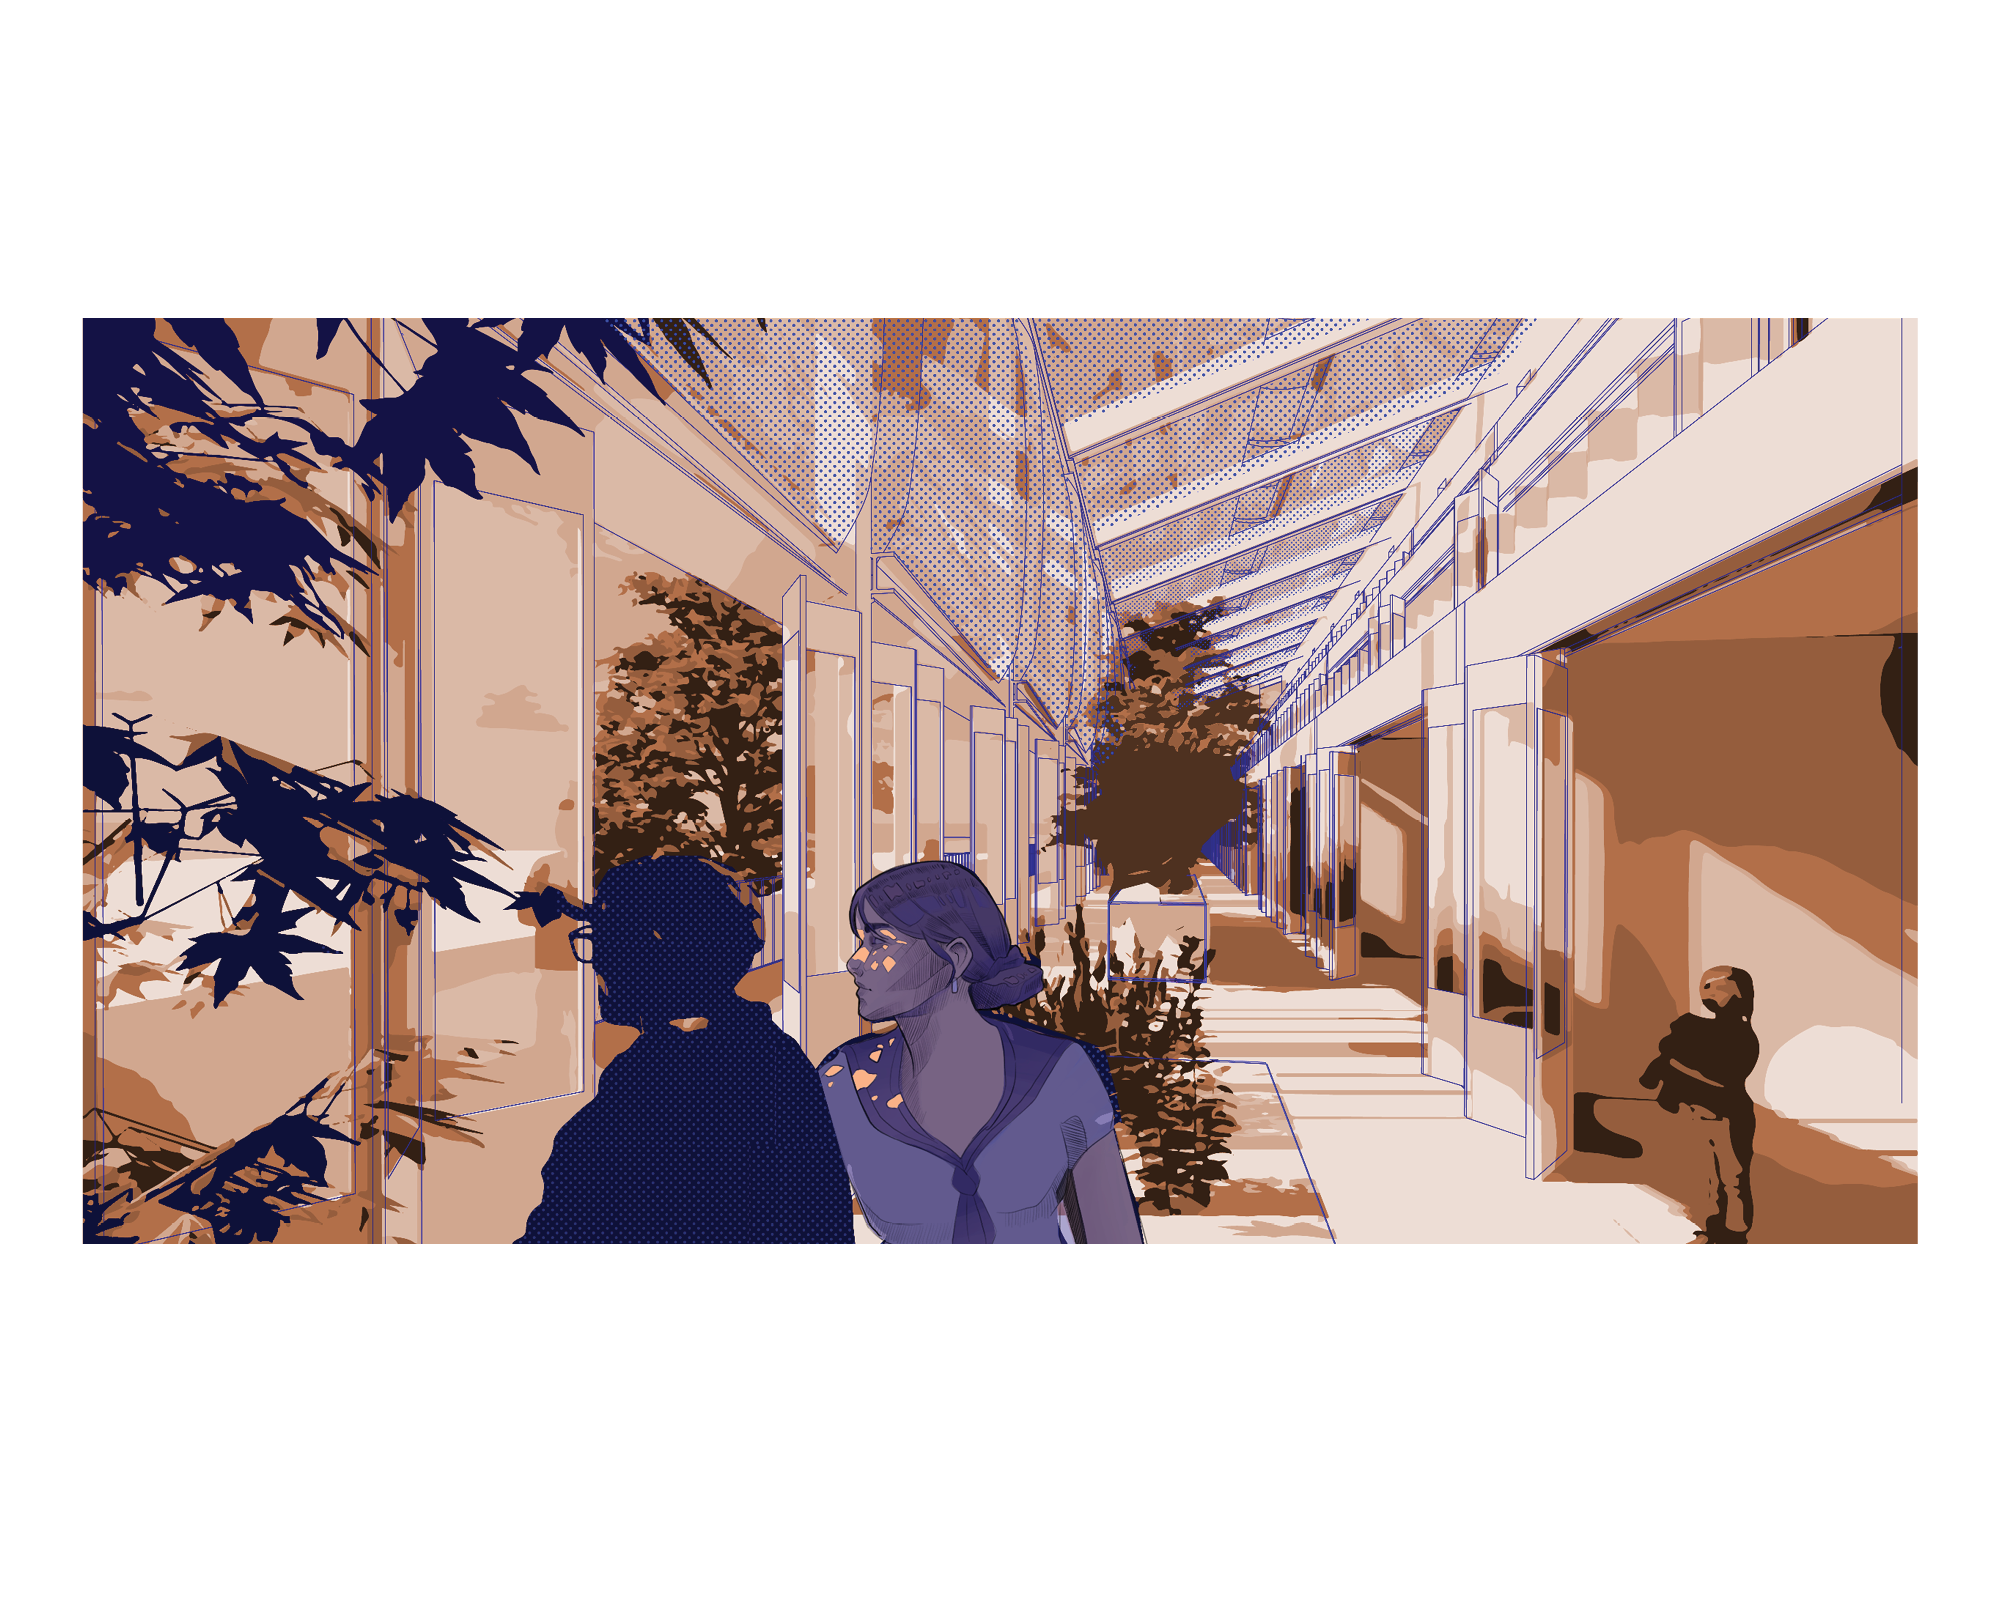 illustration of people in an indoor outdoor greenhouse space 